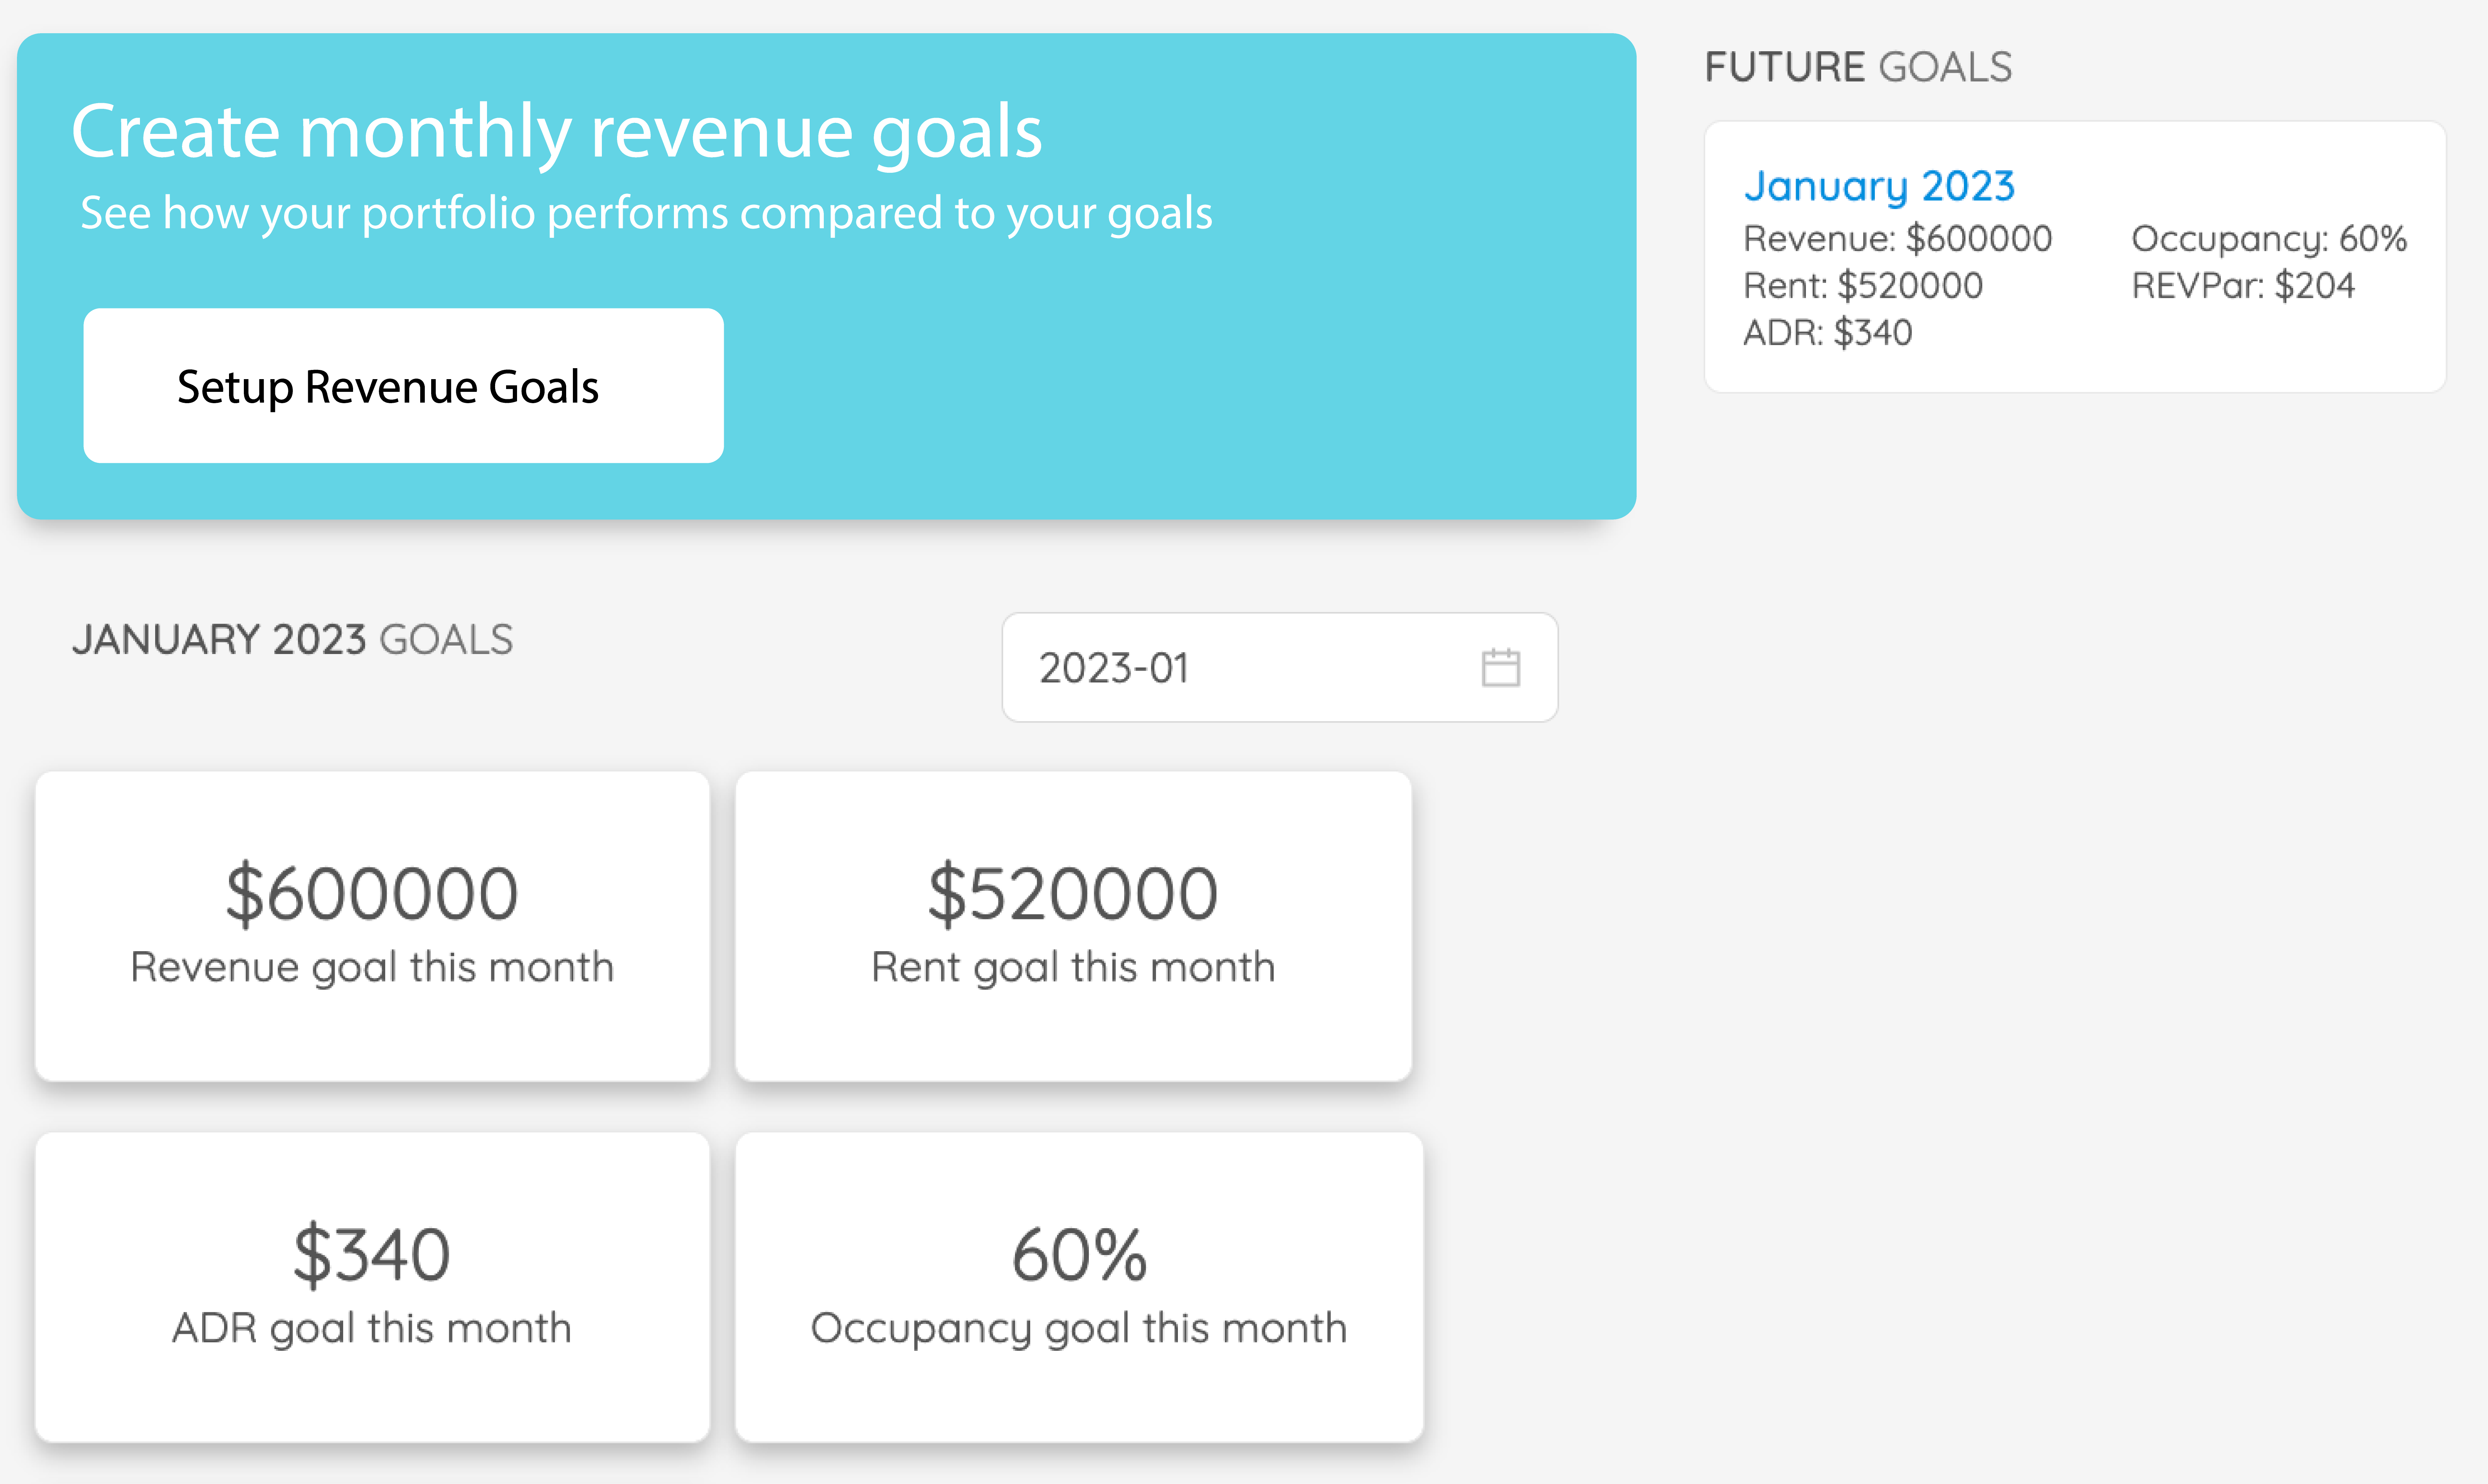 Budgeting and Goals